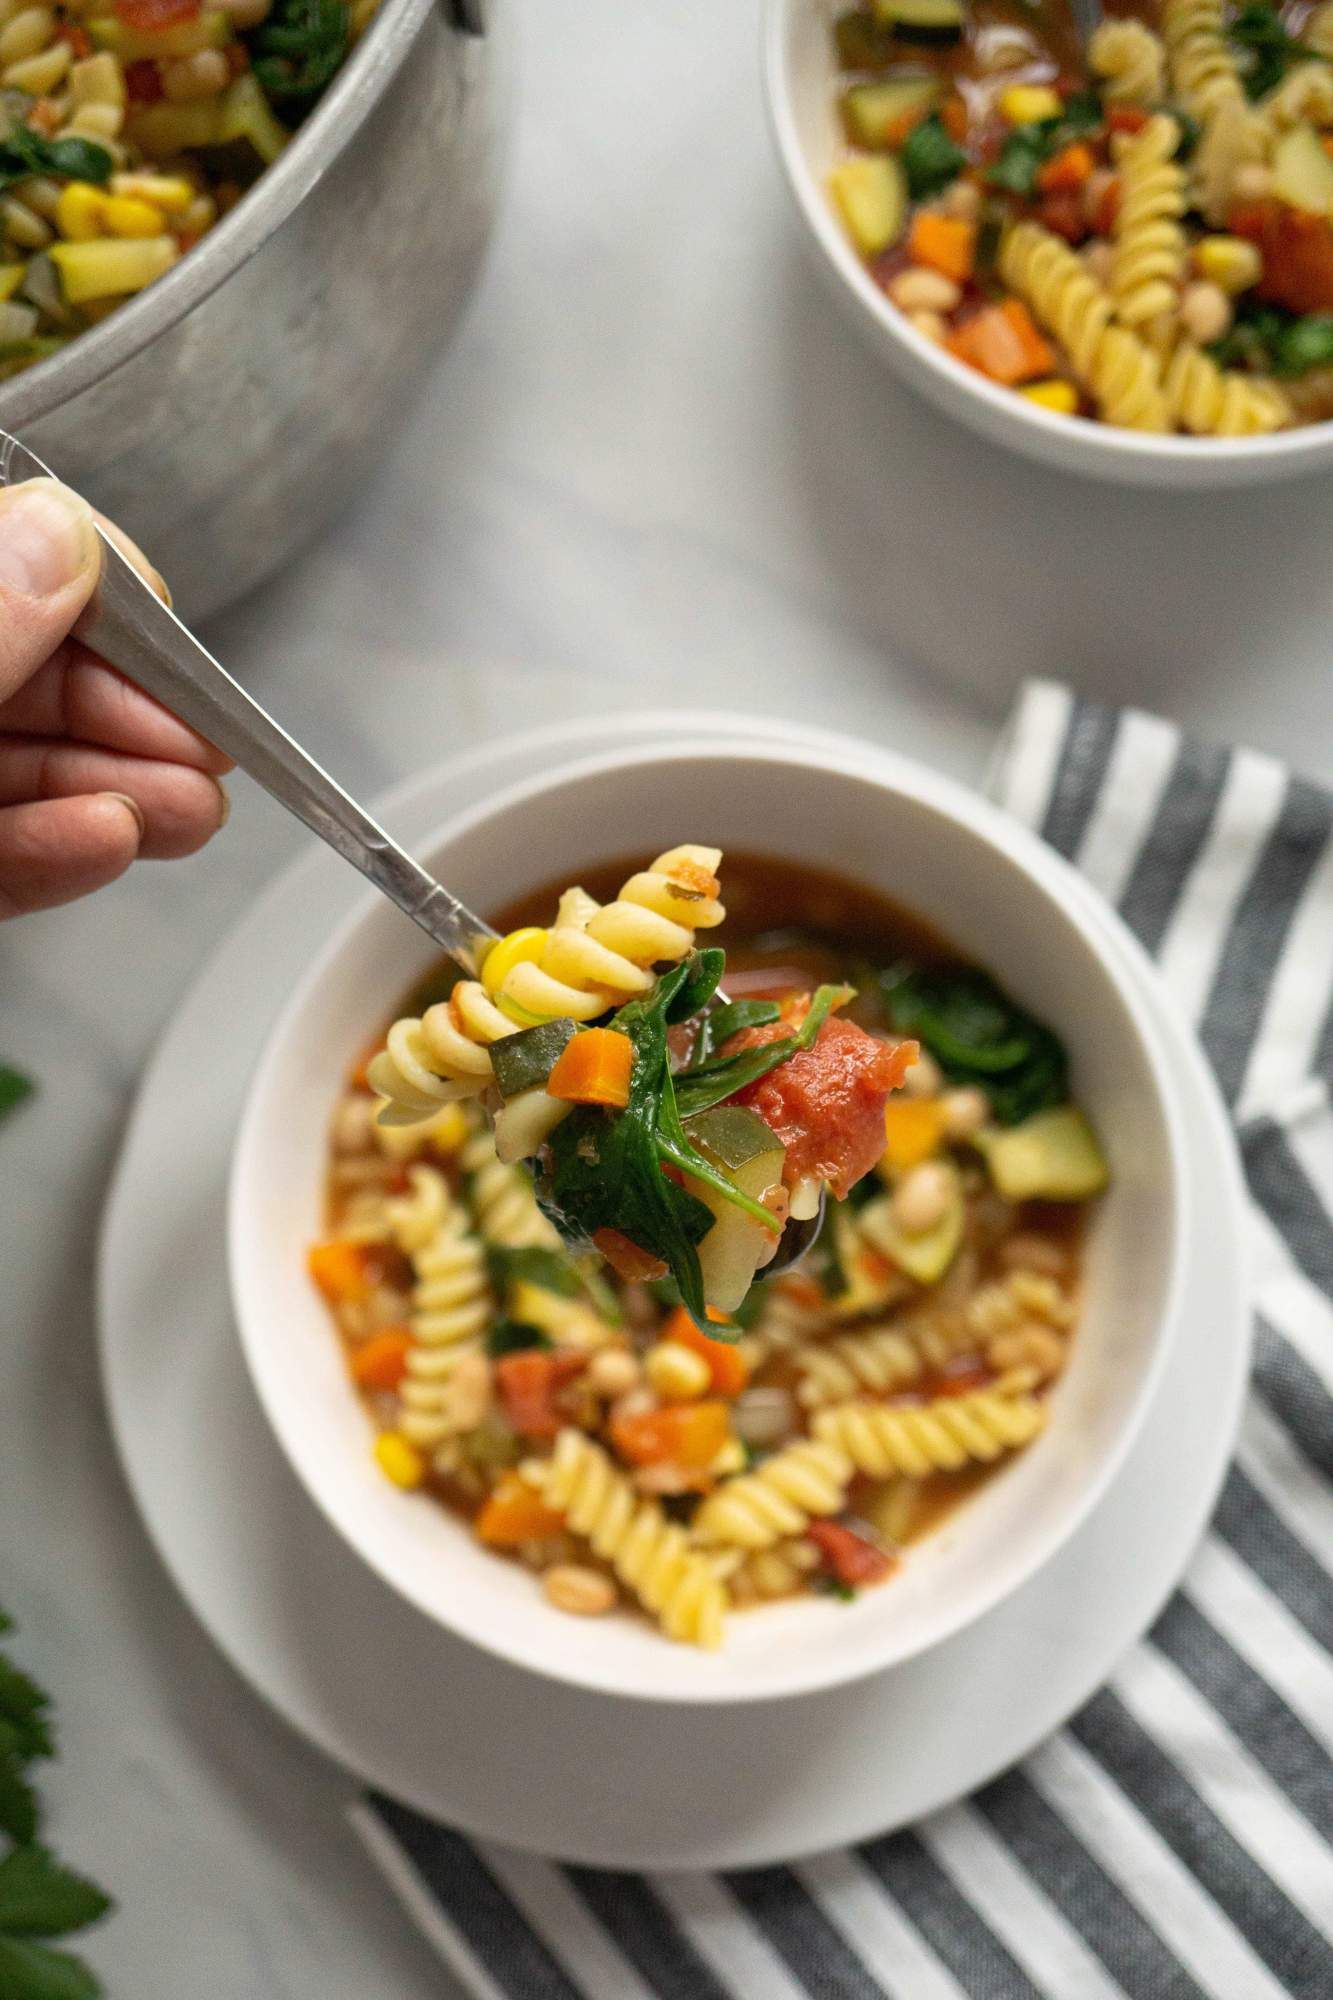 Minestrone soup with vegetables, pasta, and white beans on a spoon.